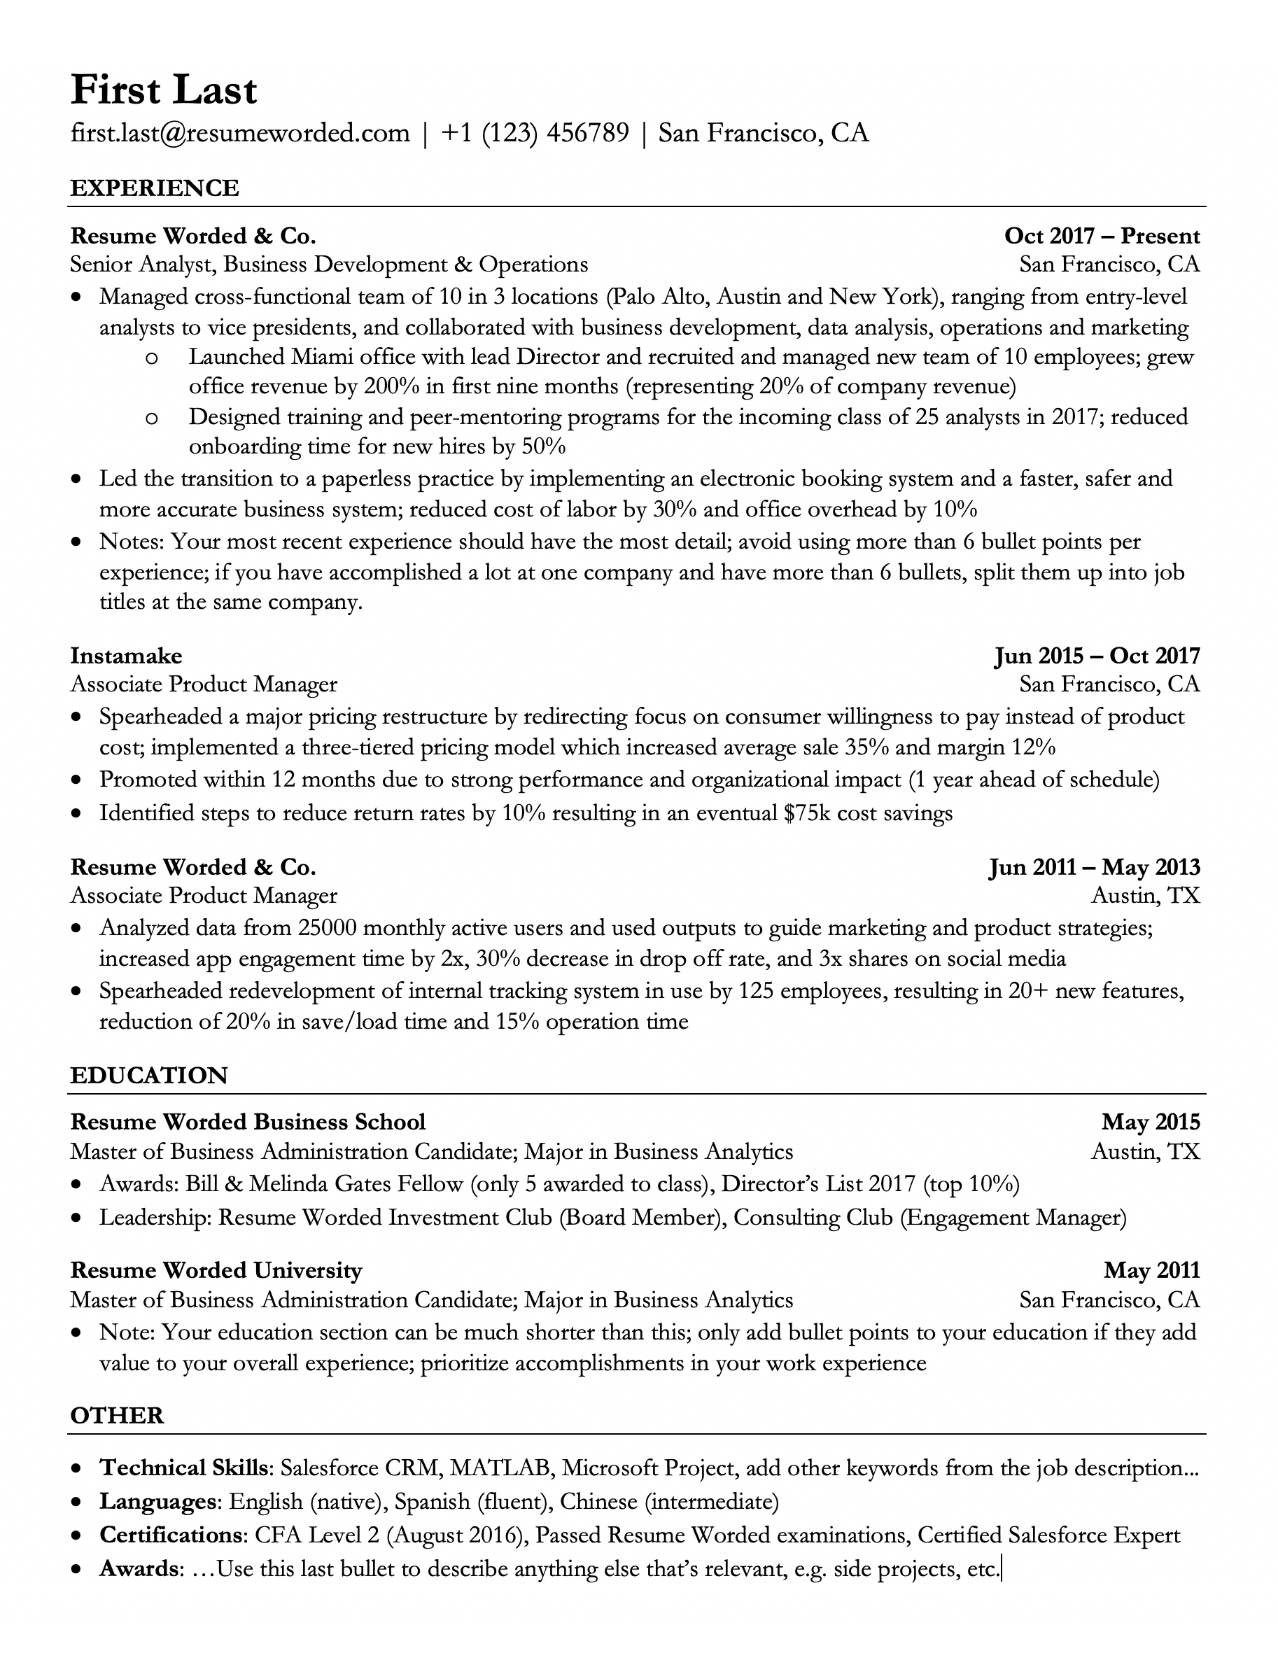 resume examples for sales manager position   38